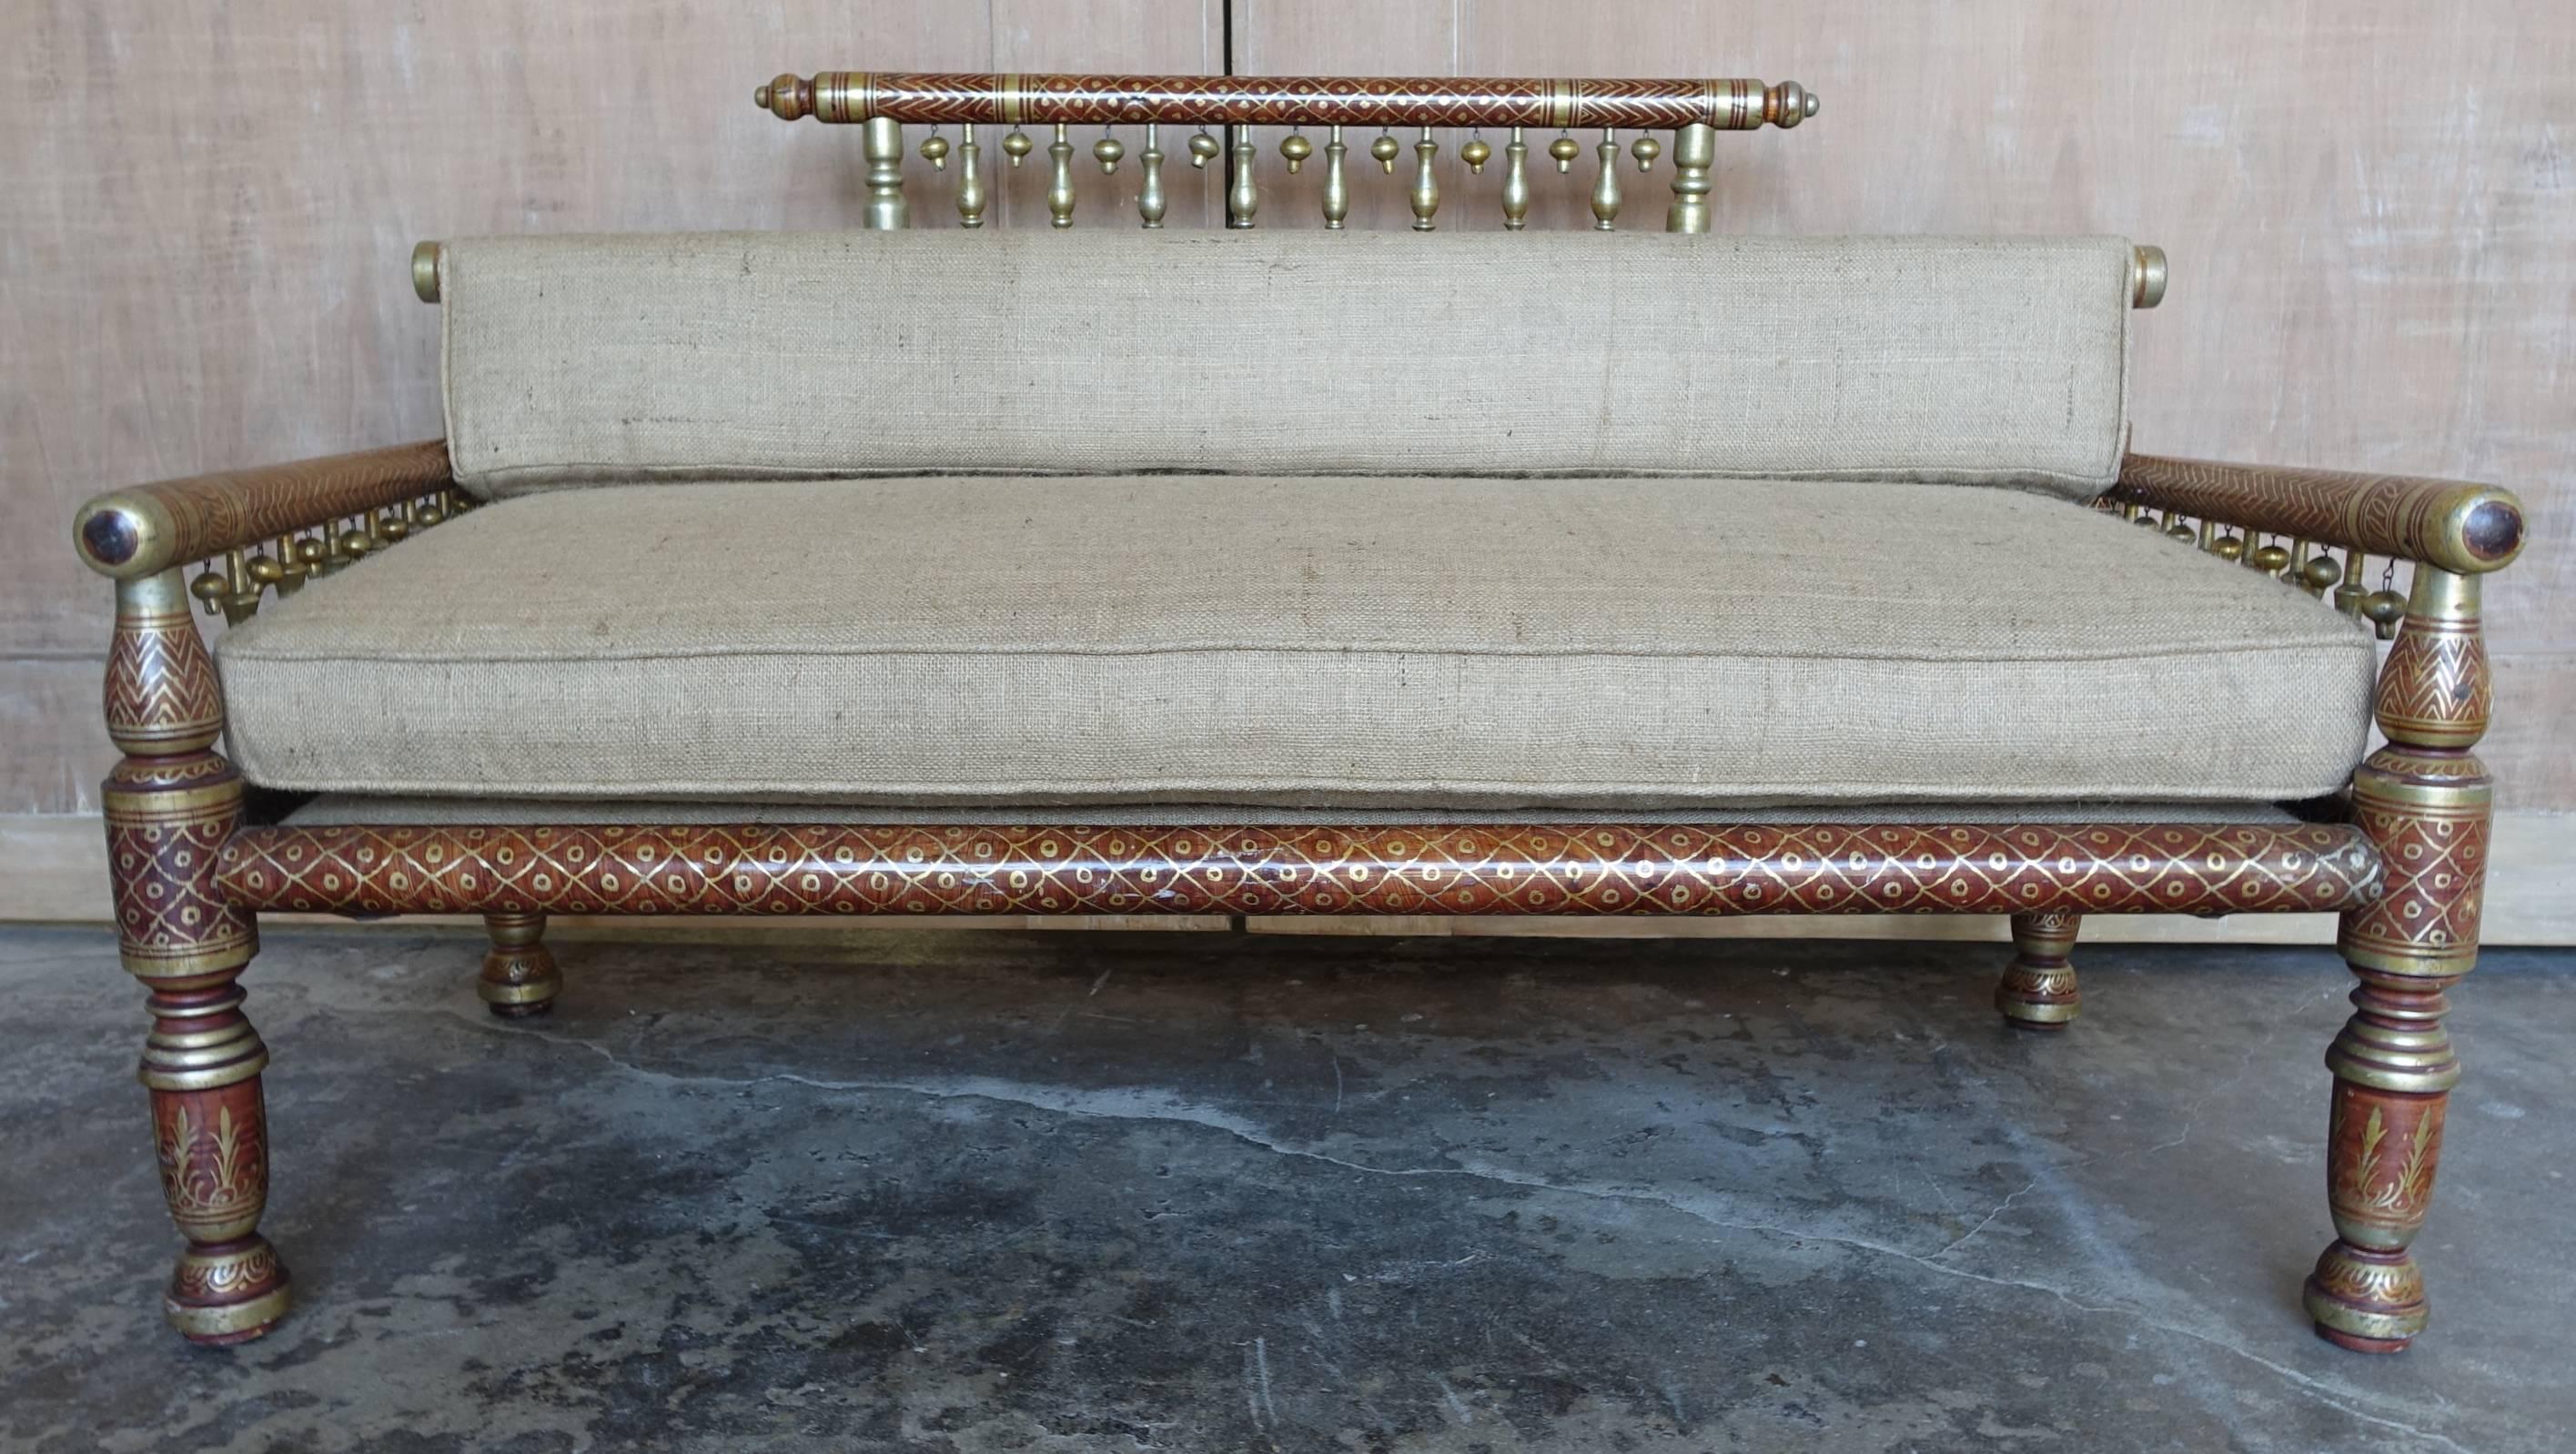 Moroccan wood settee with hand-painted and silver gilt details. Loose burlap cushion with self-welt detail. Long burlap bolster is also included for additional comfort. I have the matching chairs in another listing if you would like a three-piece